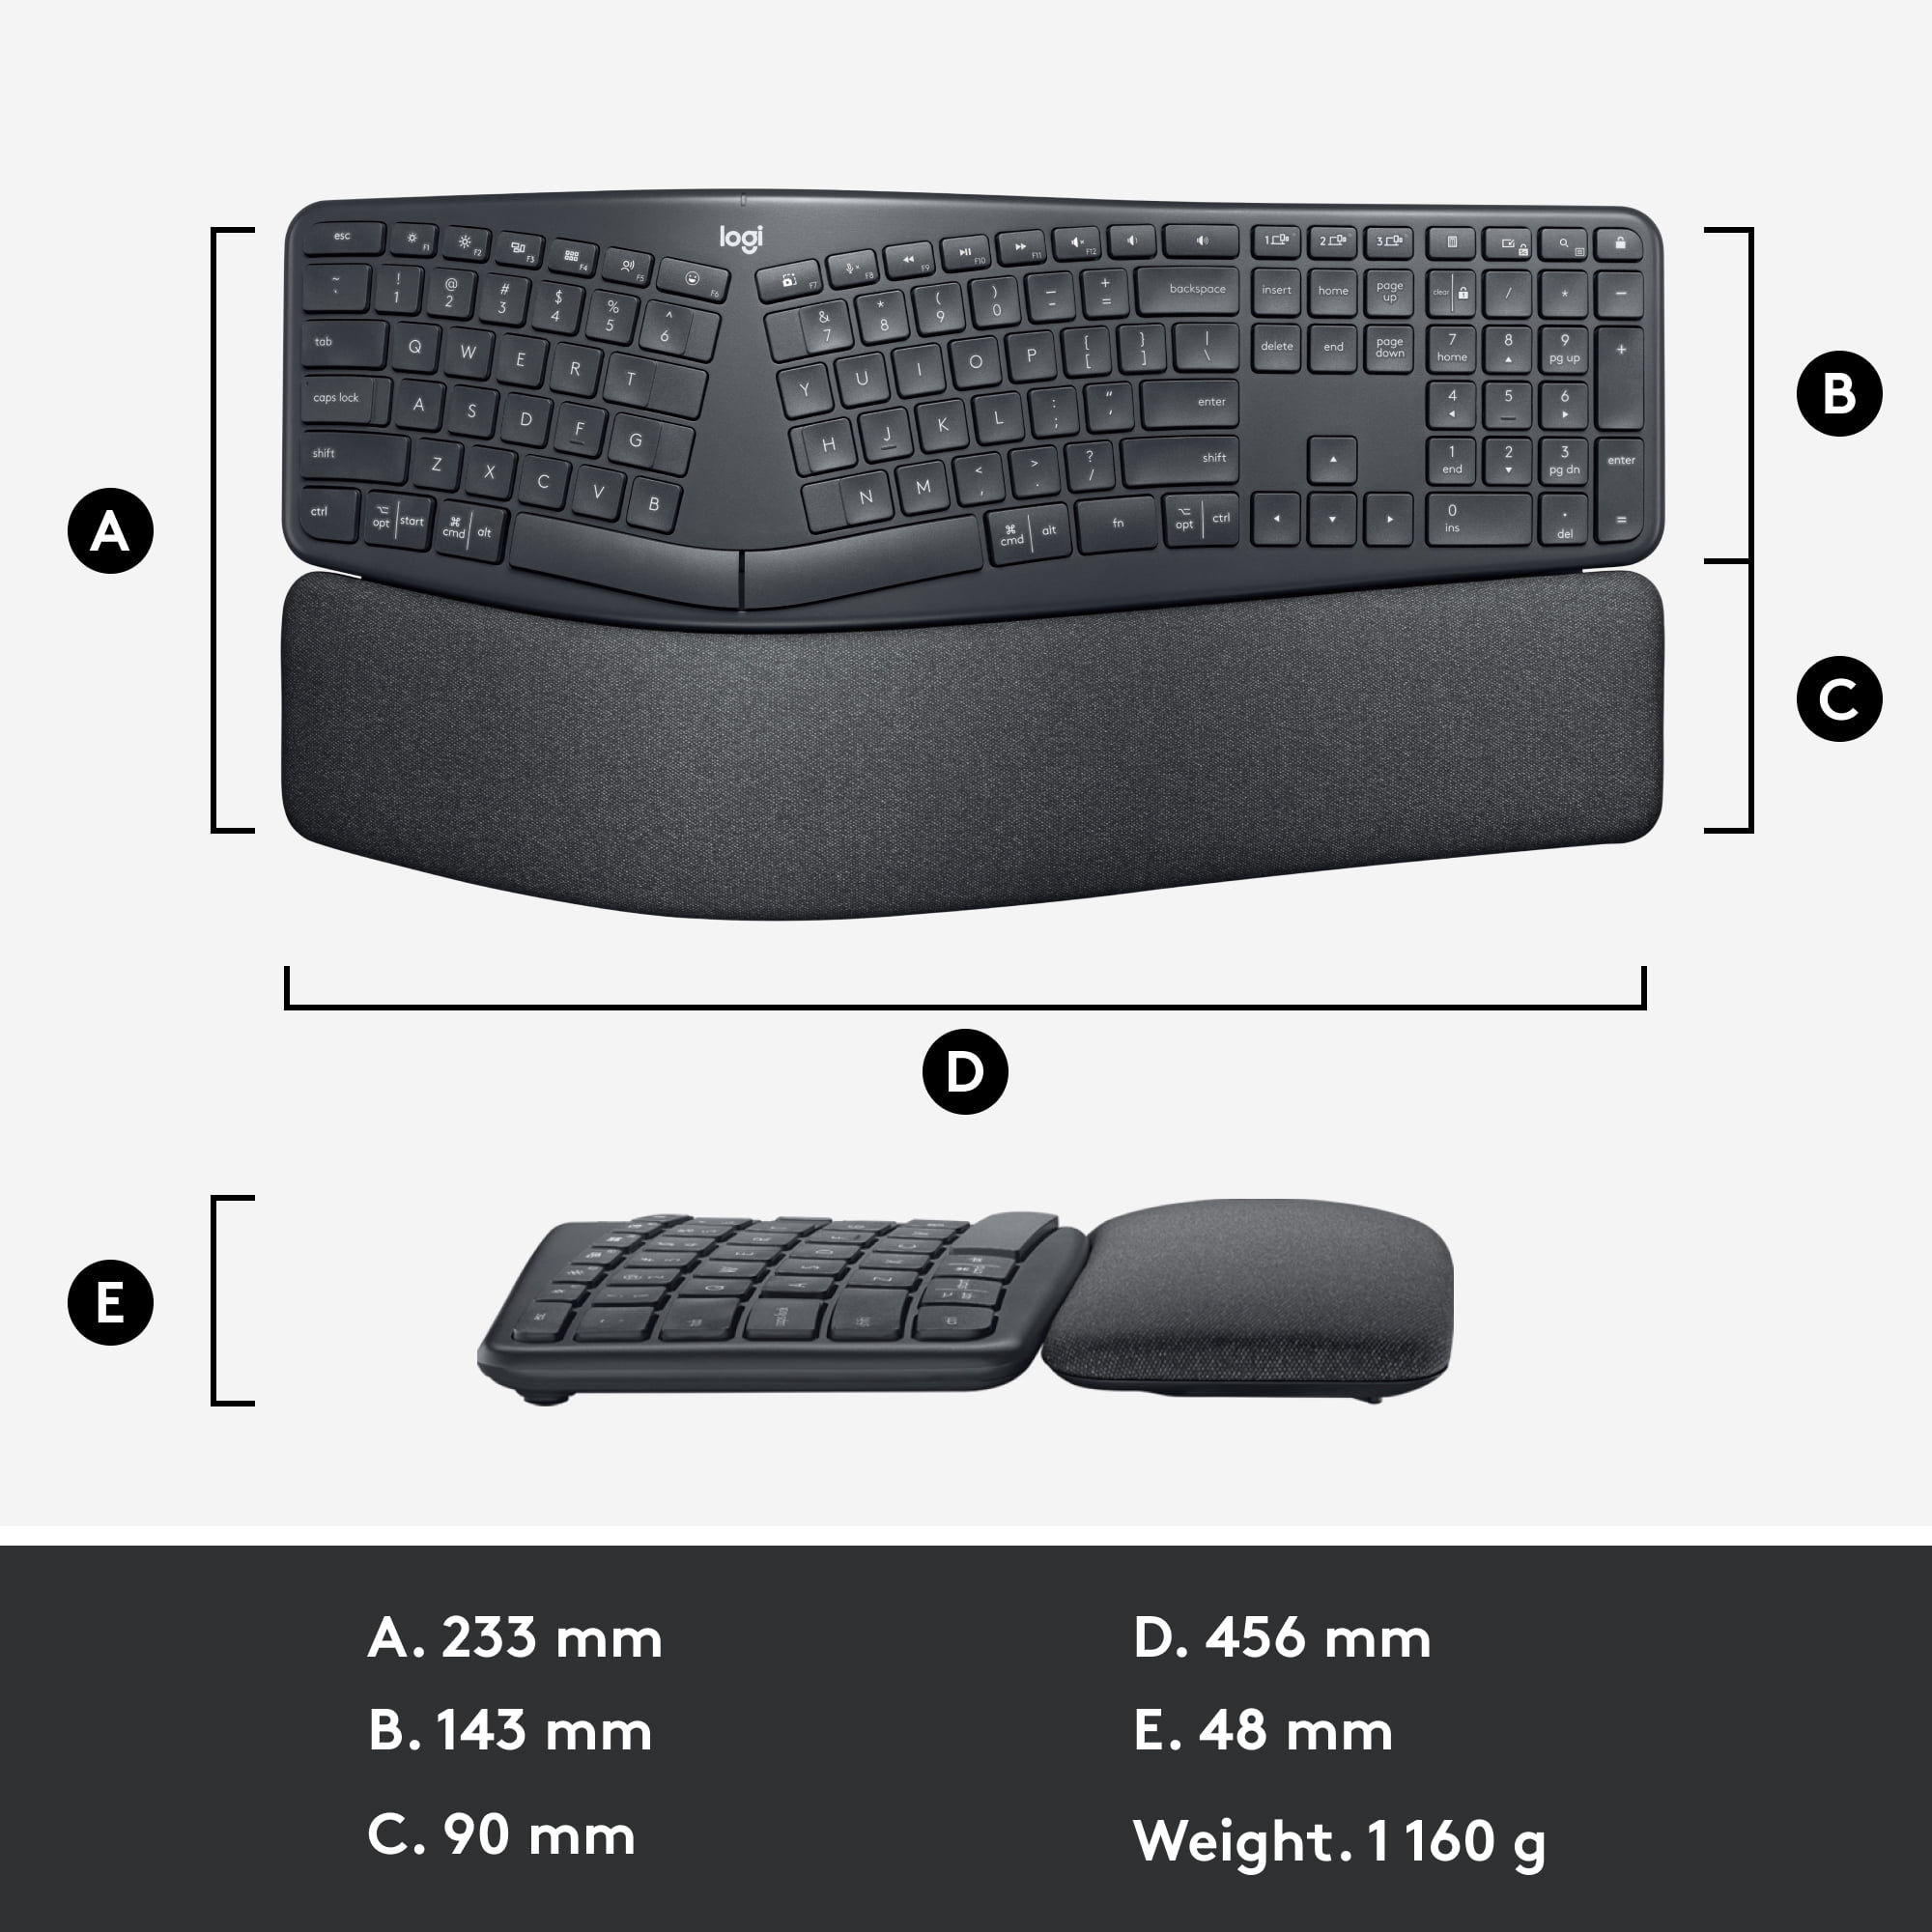 Logitech ERGO Series K860 Fabric, Graphite and - Keyboard, Connectivity, Typing, Natural Ergonomic with Compatible USB Keyboard Wireless Wrist Rest, - Split Windows/Mac Stain-Resistant Bluetooth